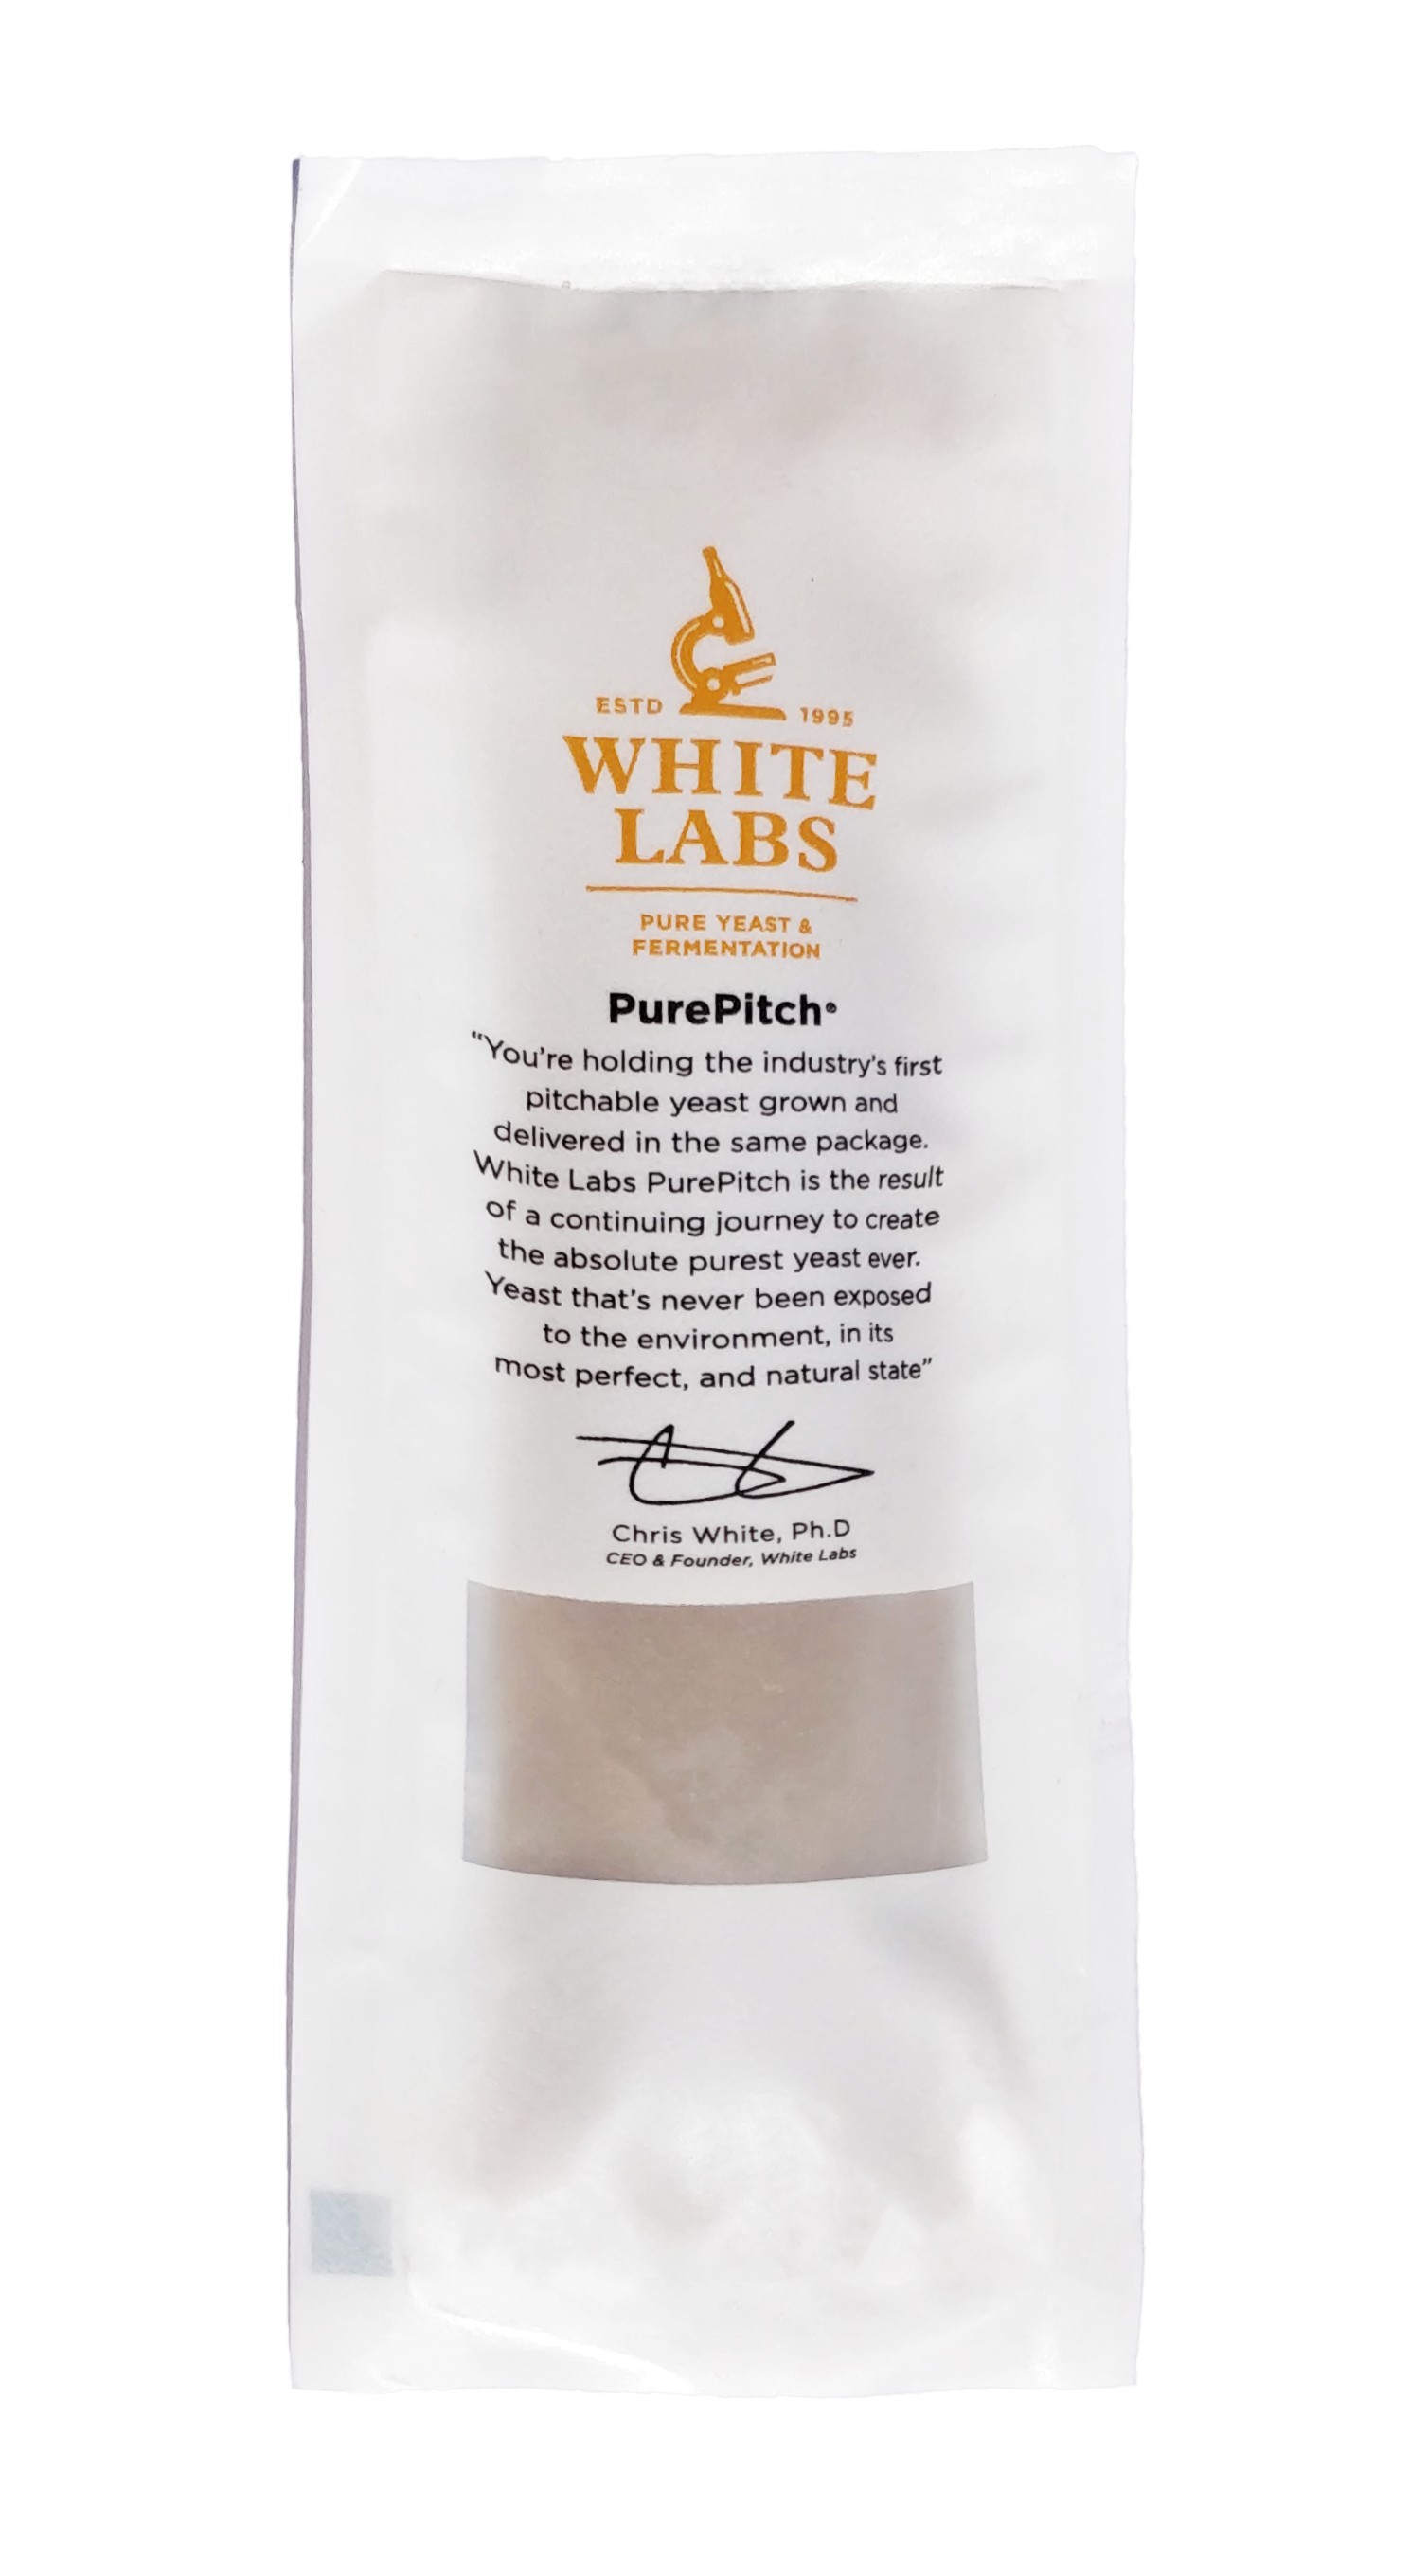 Brewing yeast White Labs WLP066 London Fog Ale